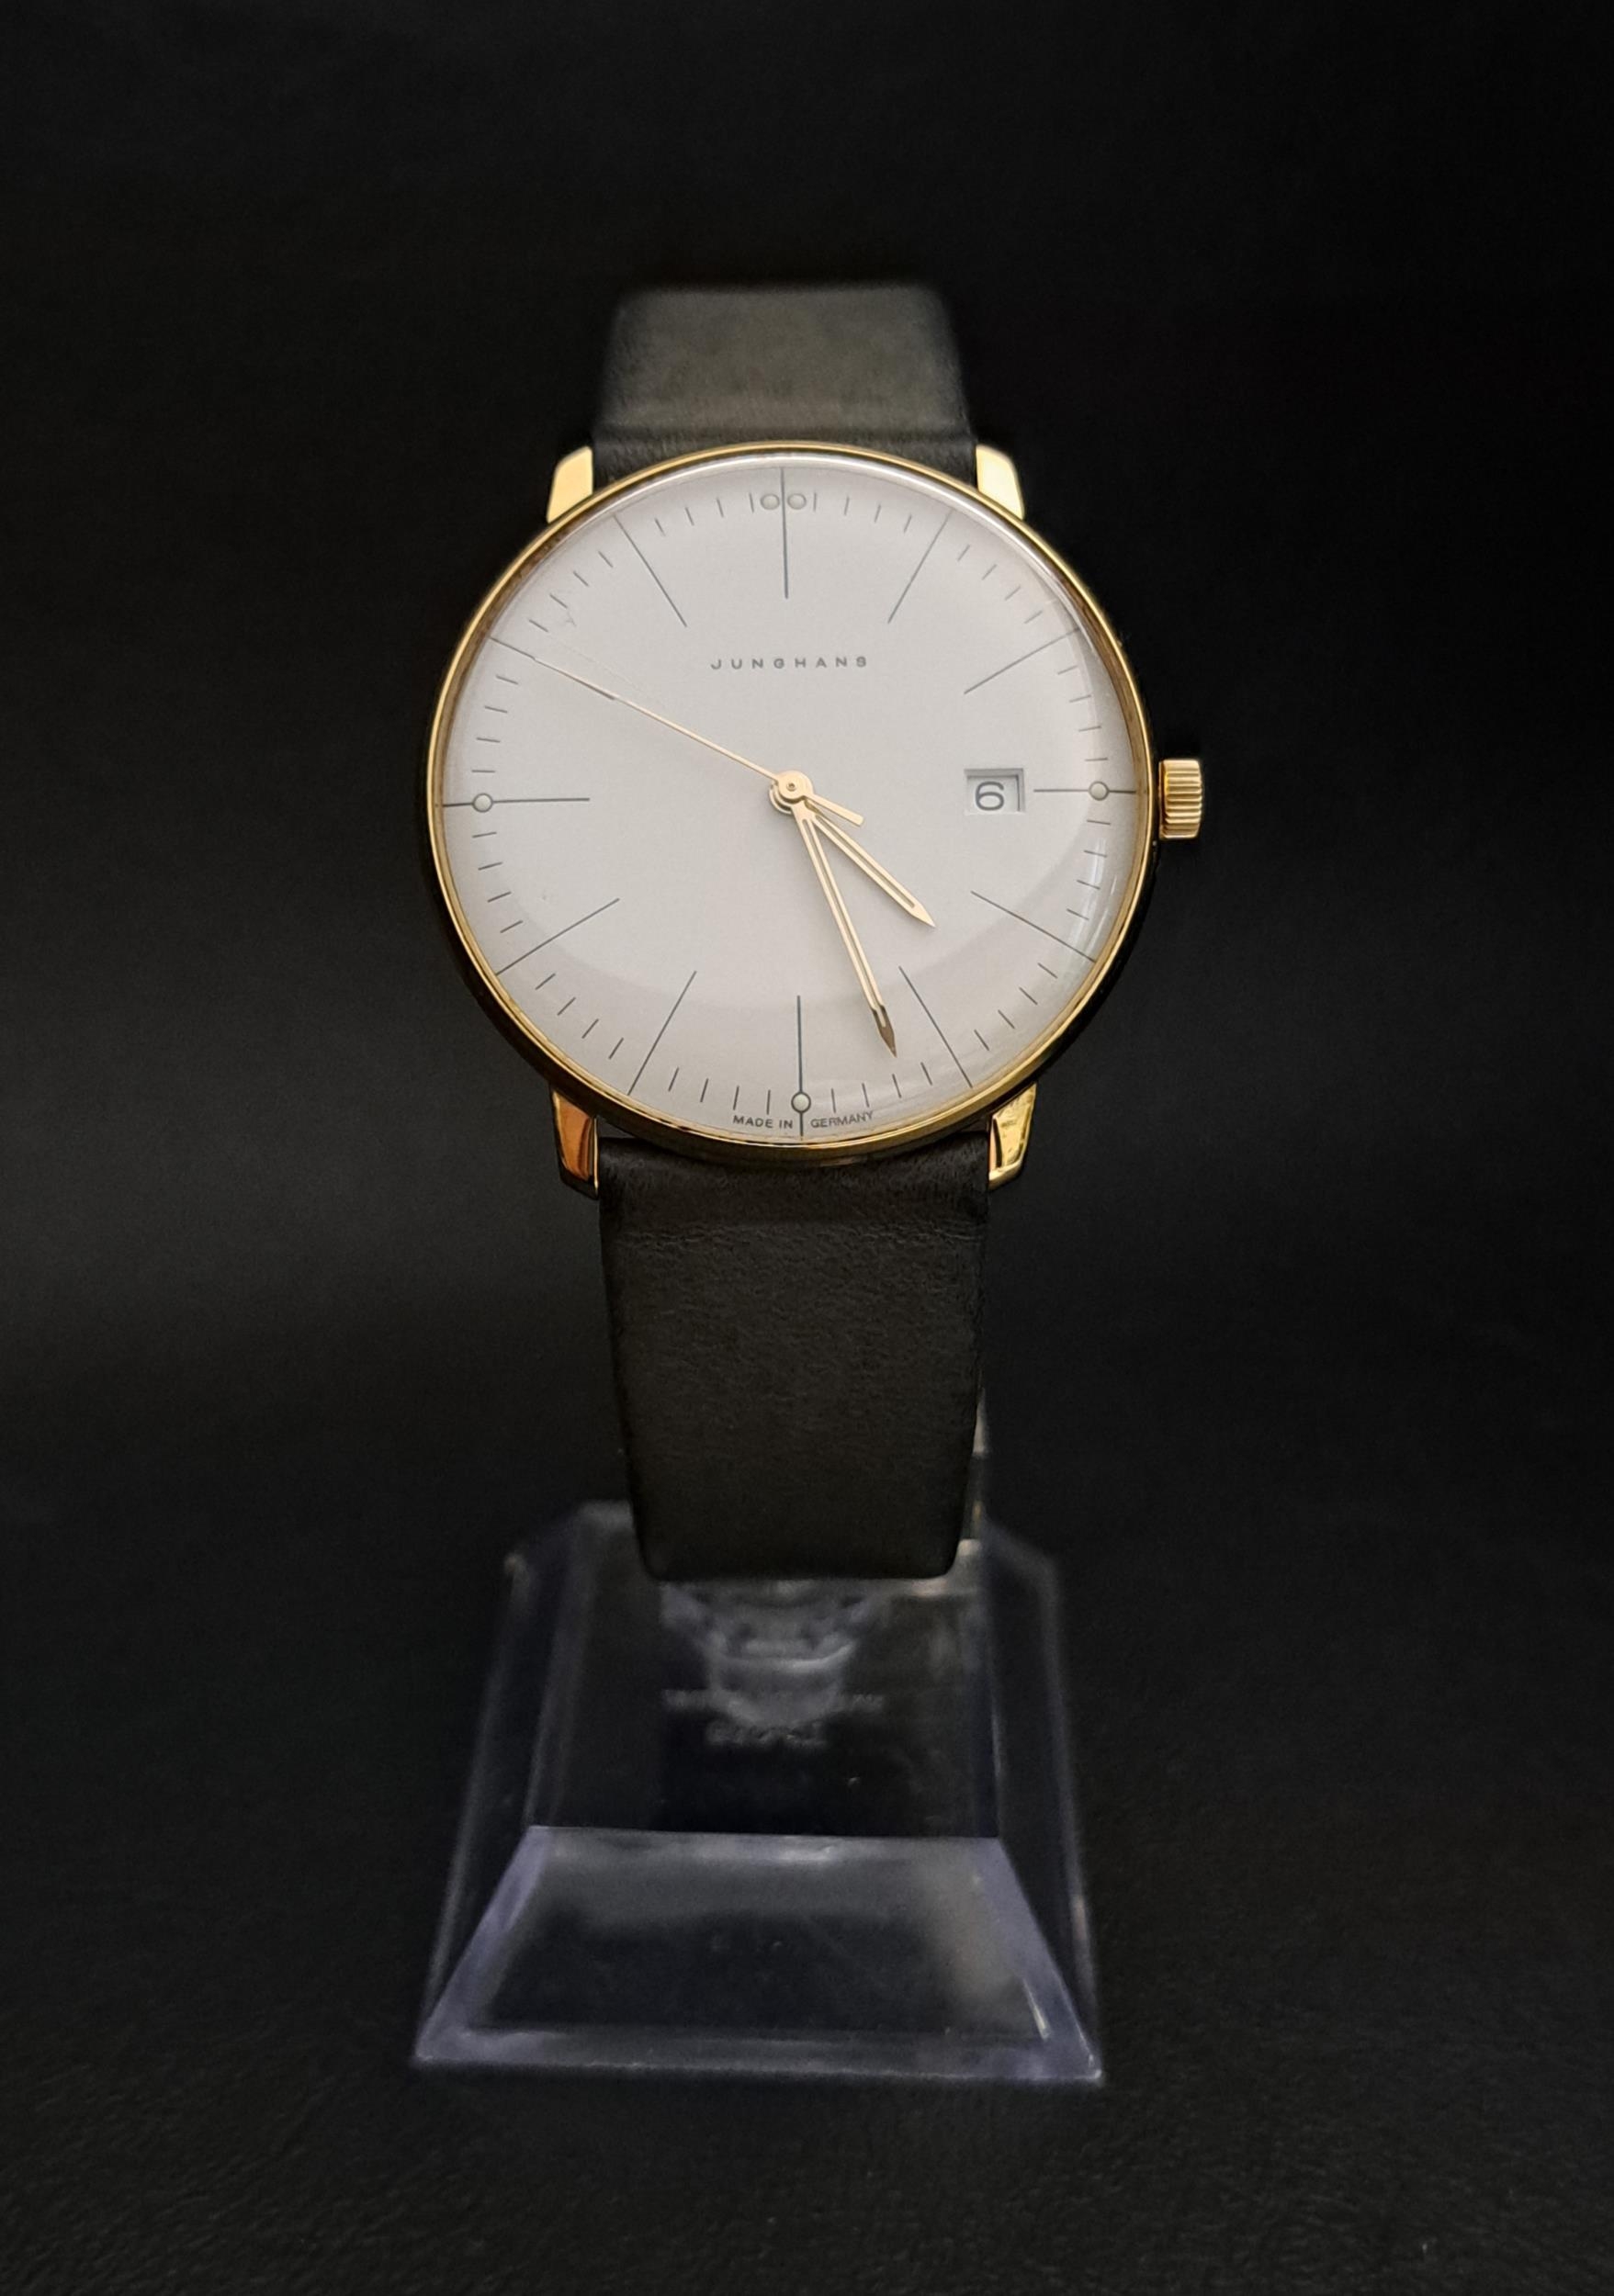 GENTLEMAN'S JUNGHANS MAX BILL WRISTWATCH the white dial with five minute baton markers, smaller